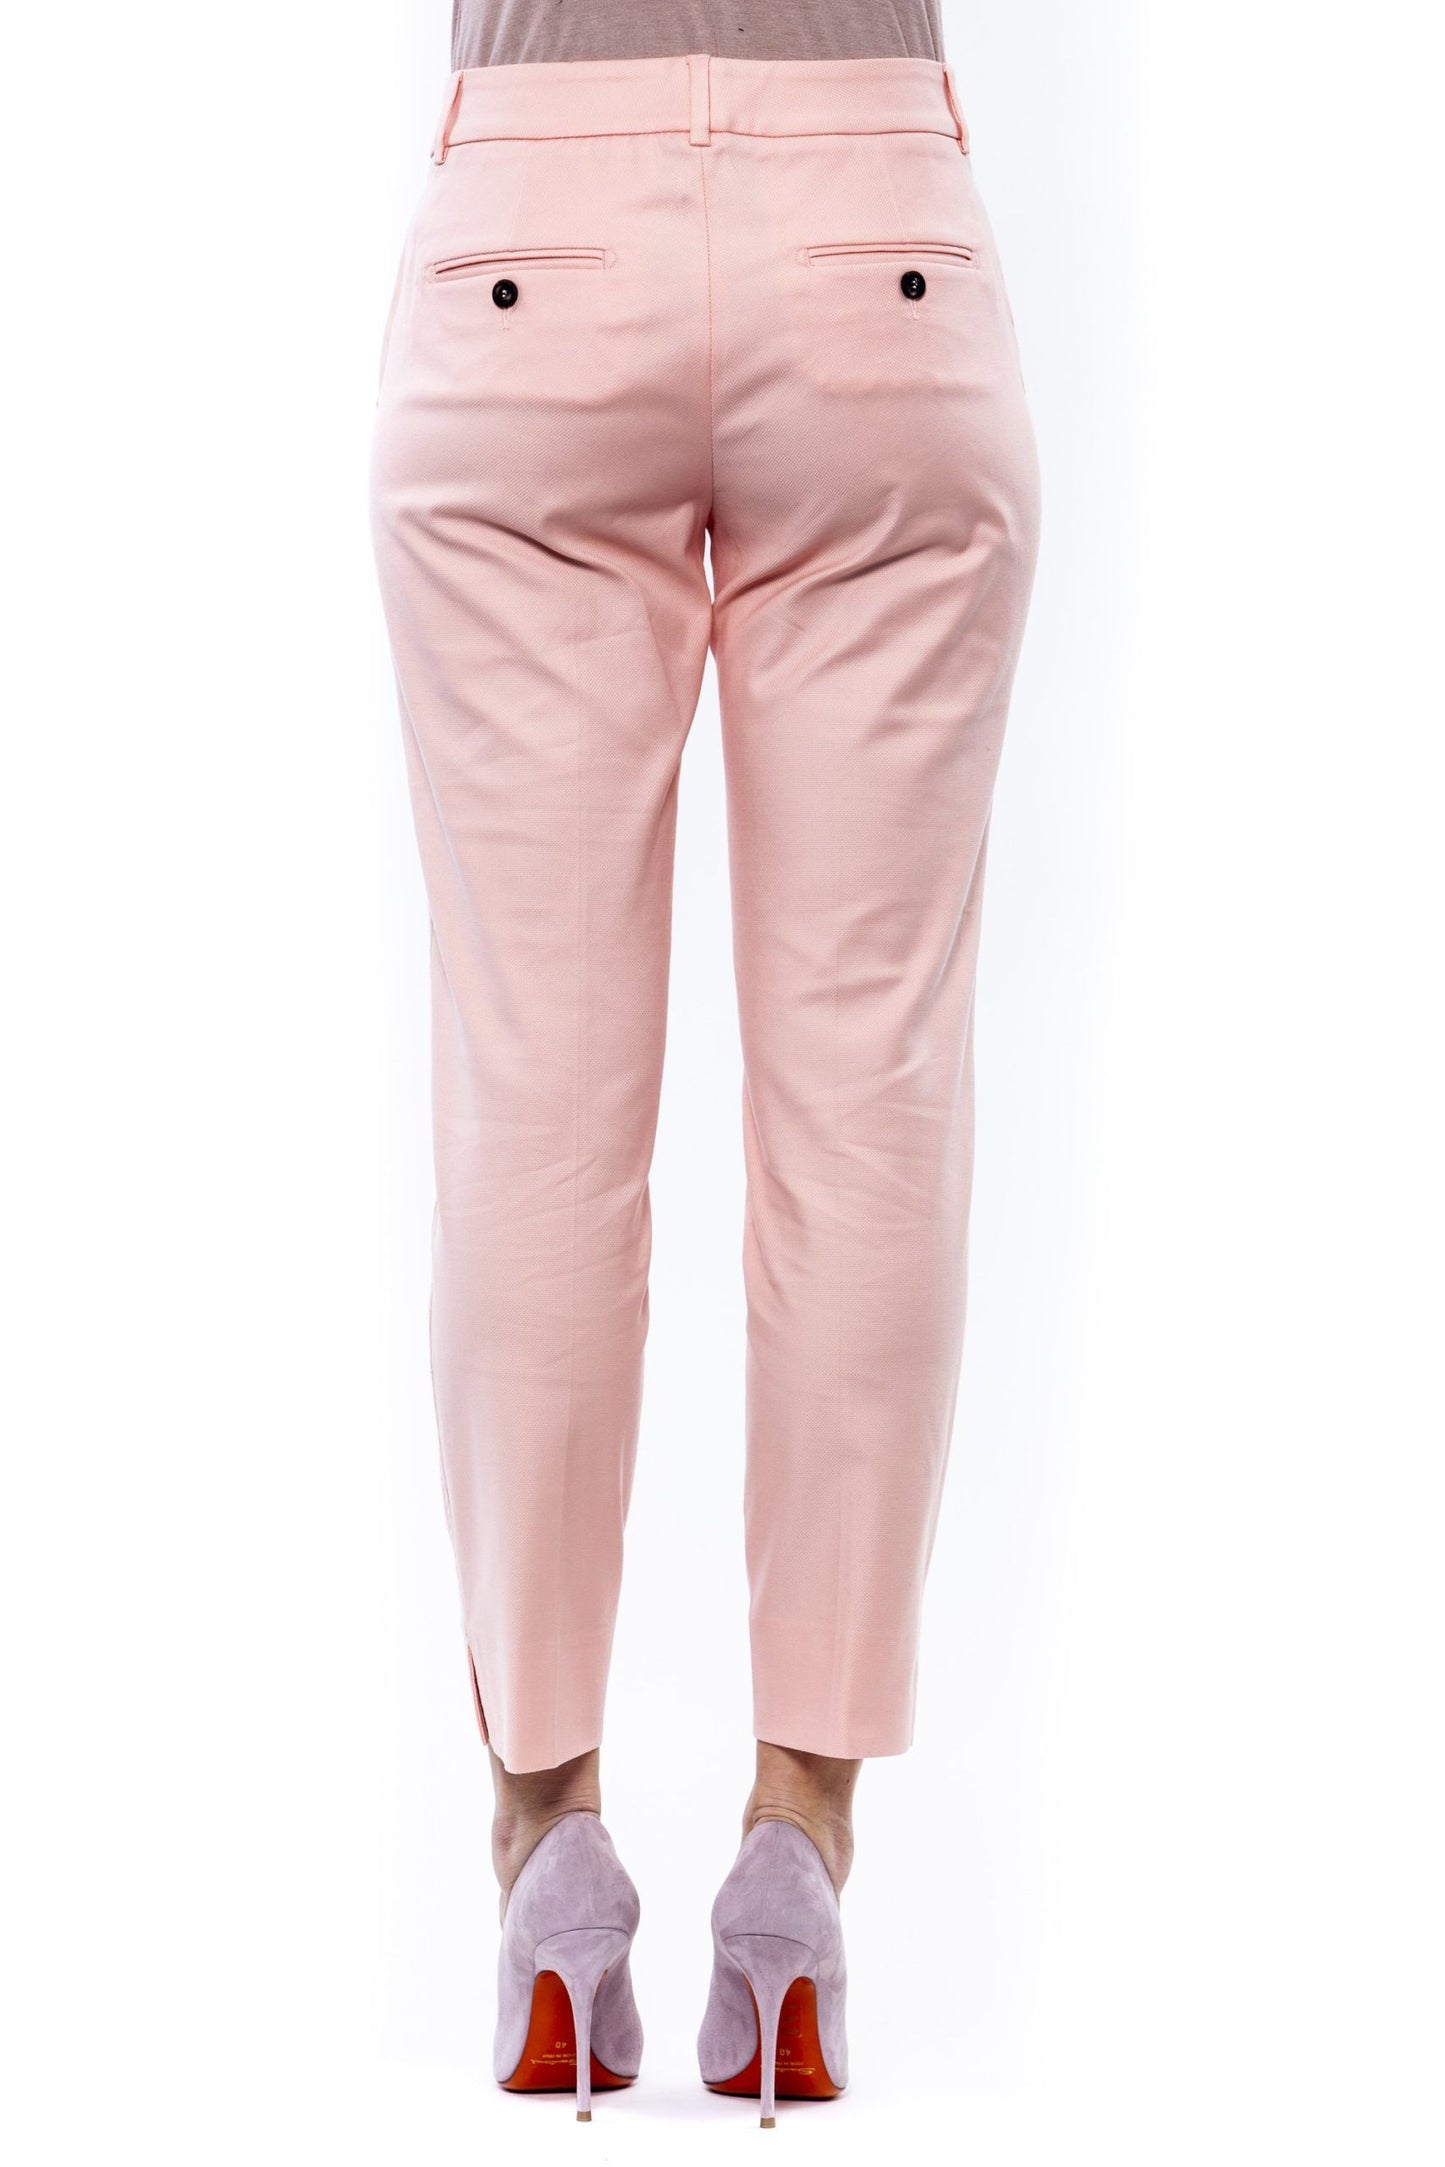 Chic Pink Ankle Trousers for a Sleek Fit